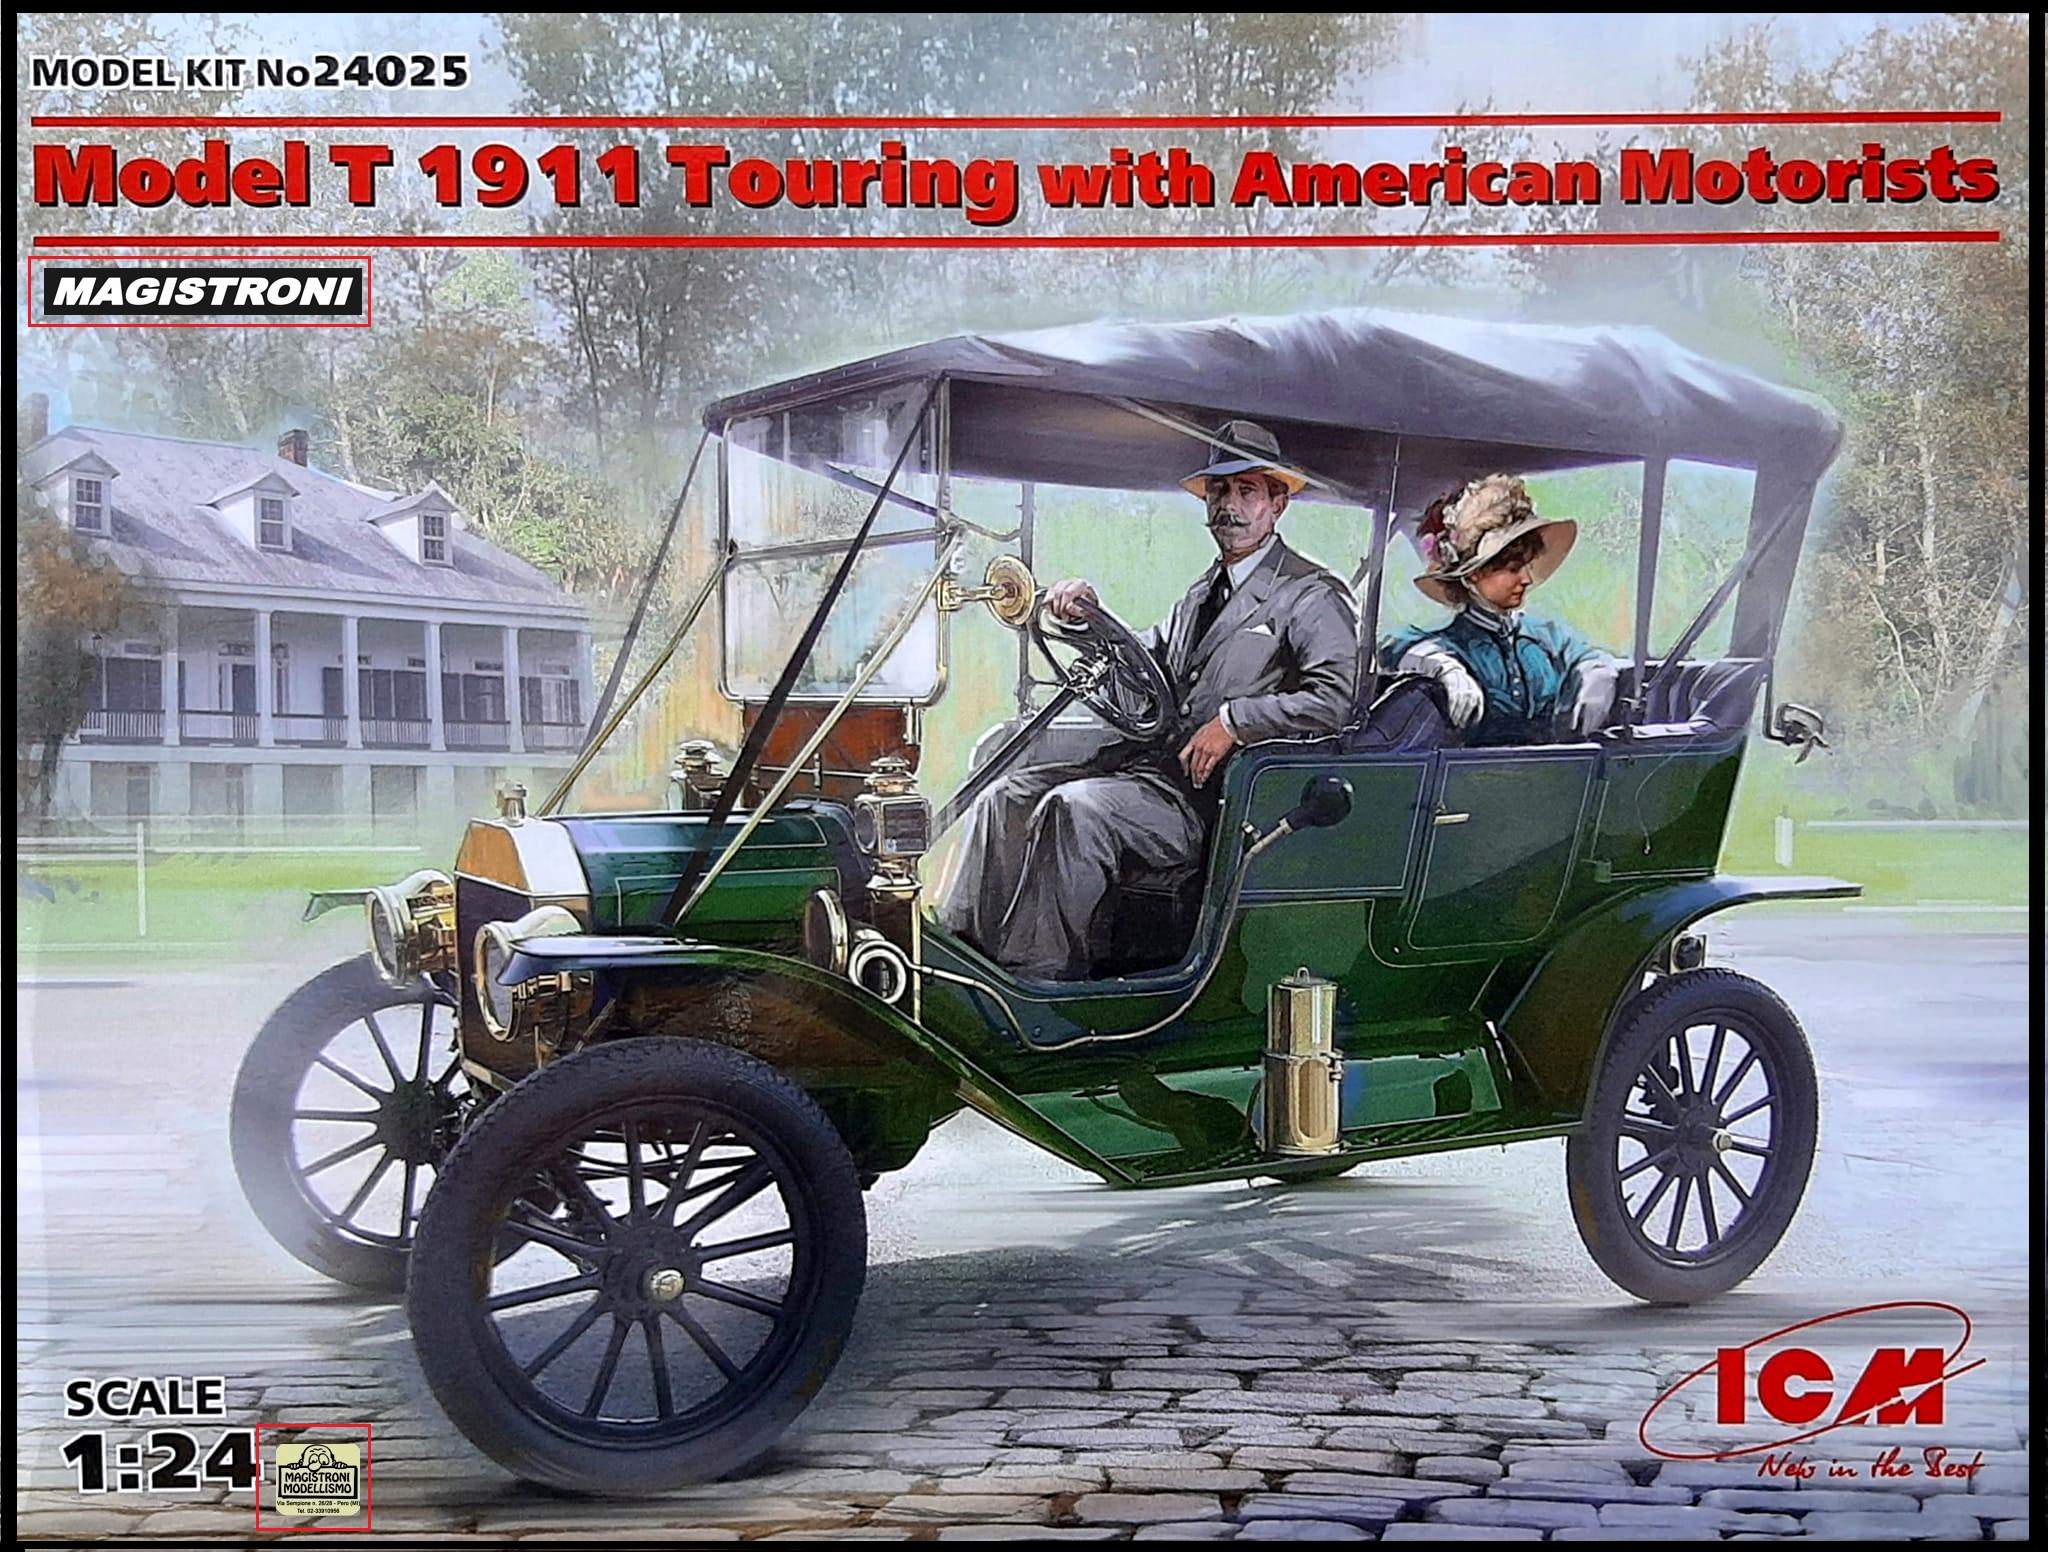 MODEL T 1911 TOURING with American Motorist